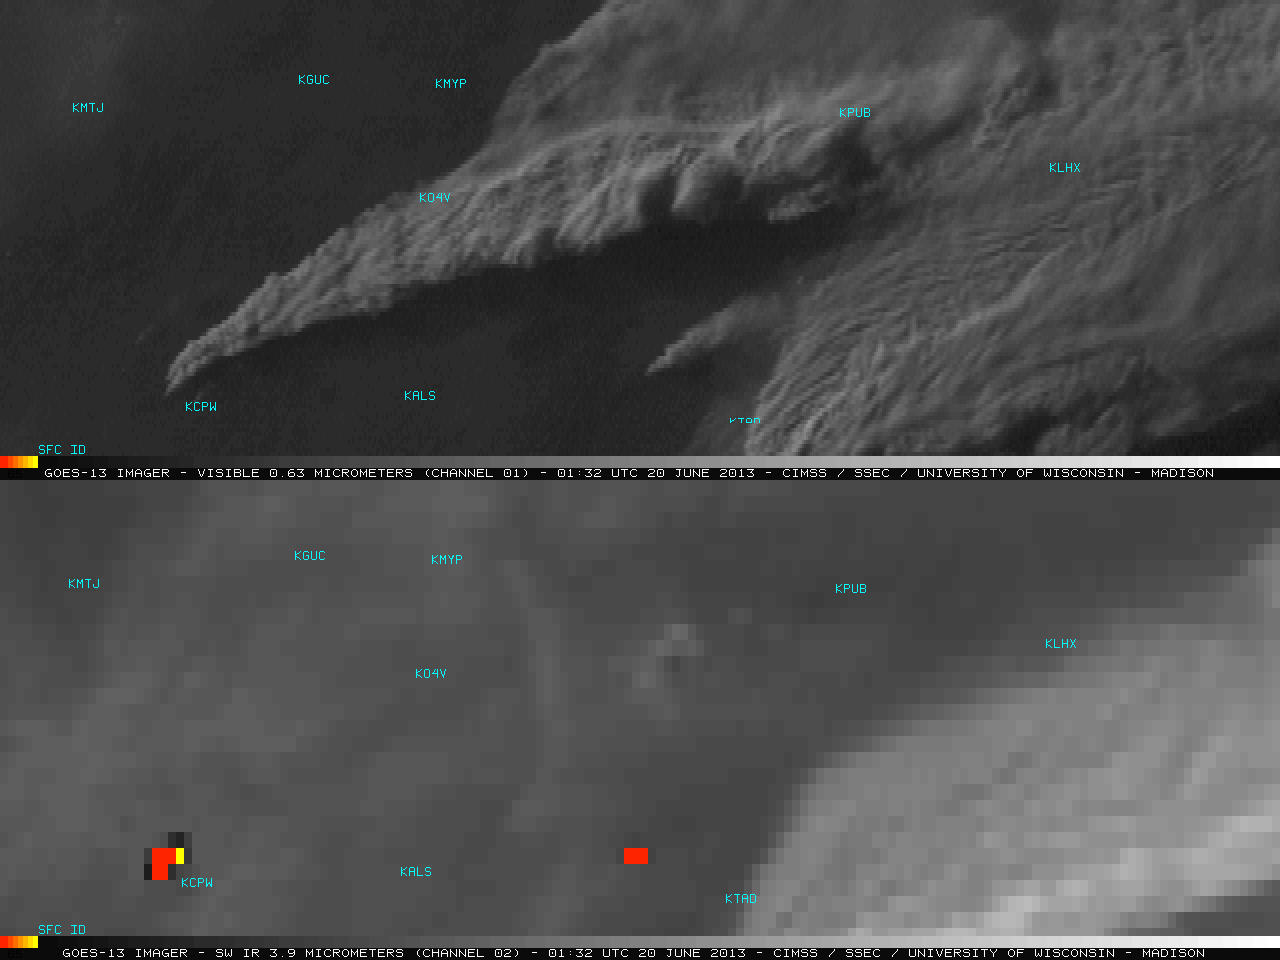 GOES-13 0.63 Âµm visible channel and 3.9 Âµm shortwave IR channel images (click image to play animation)